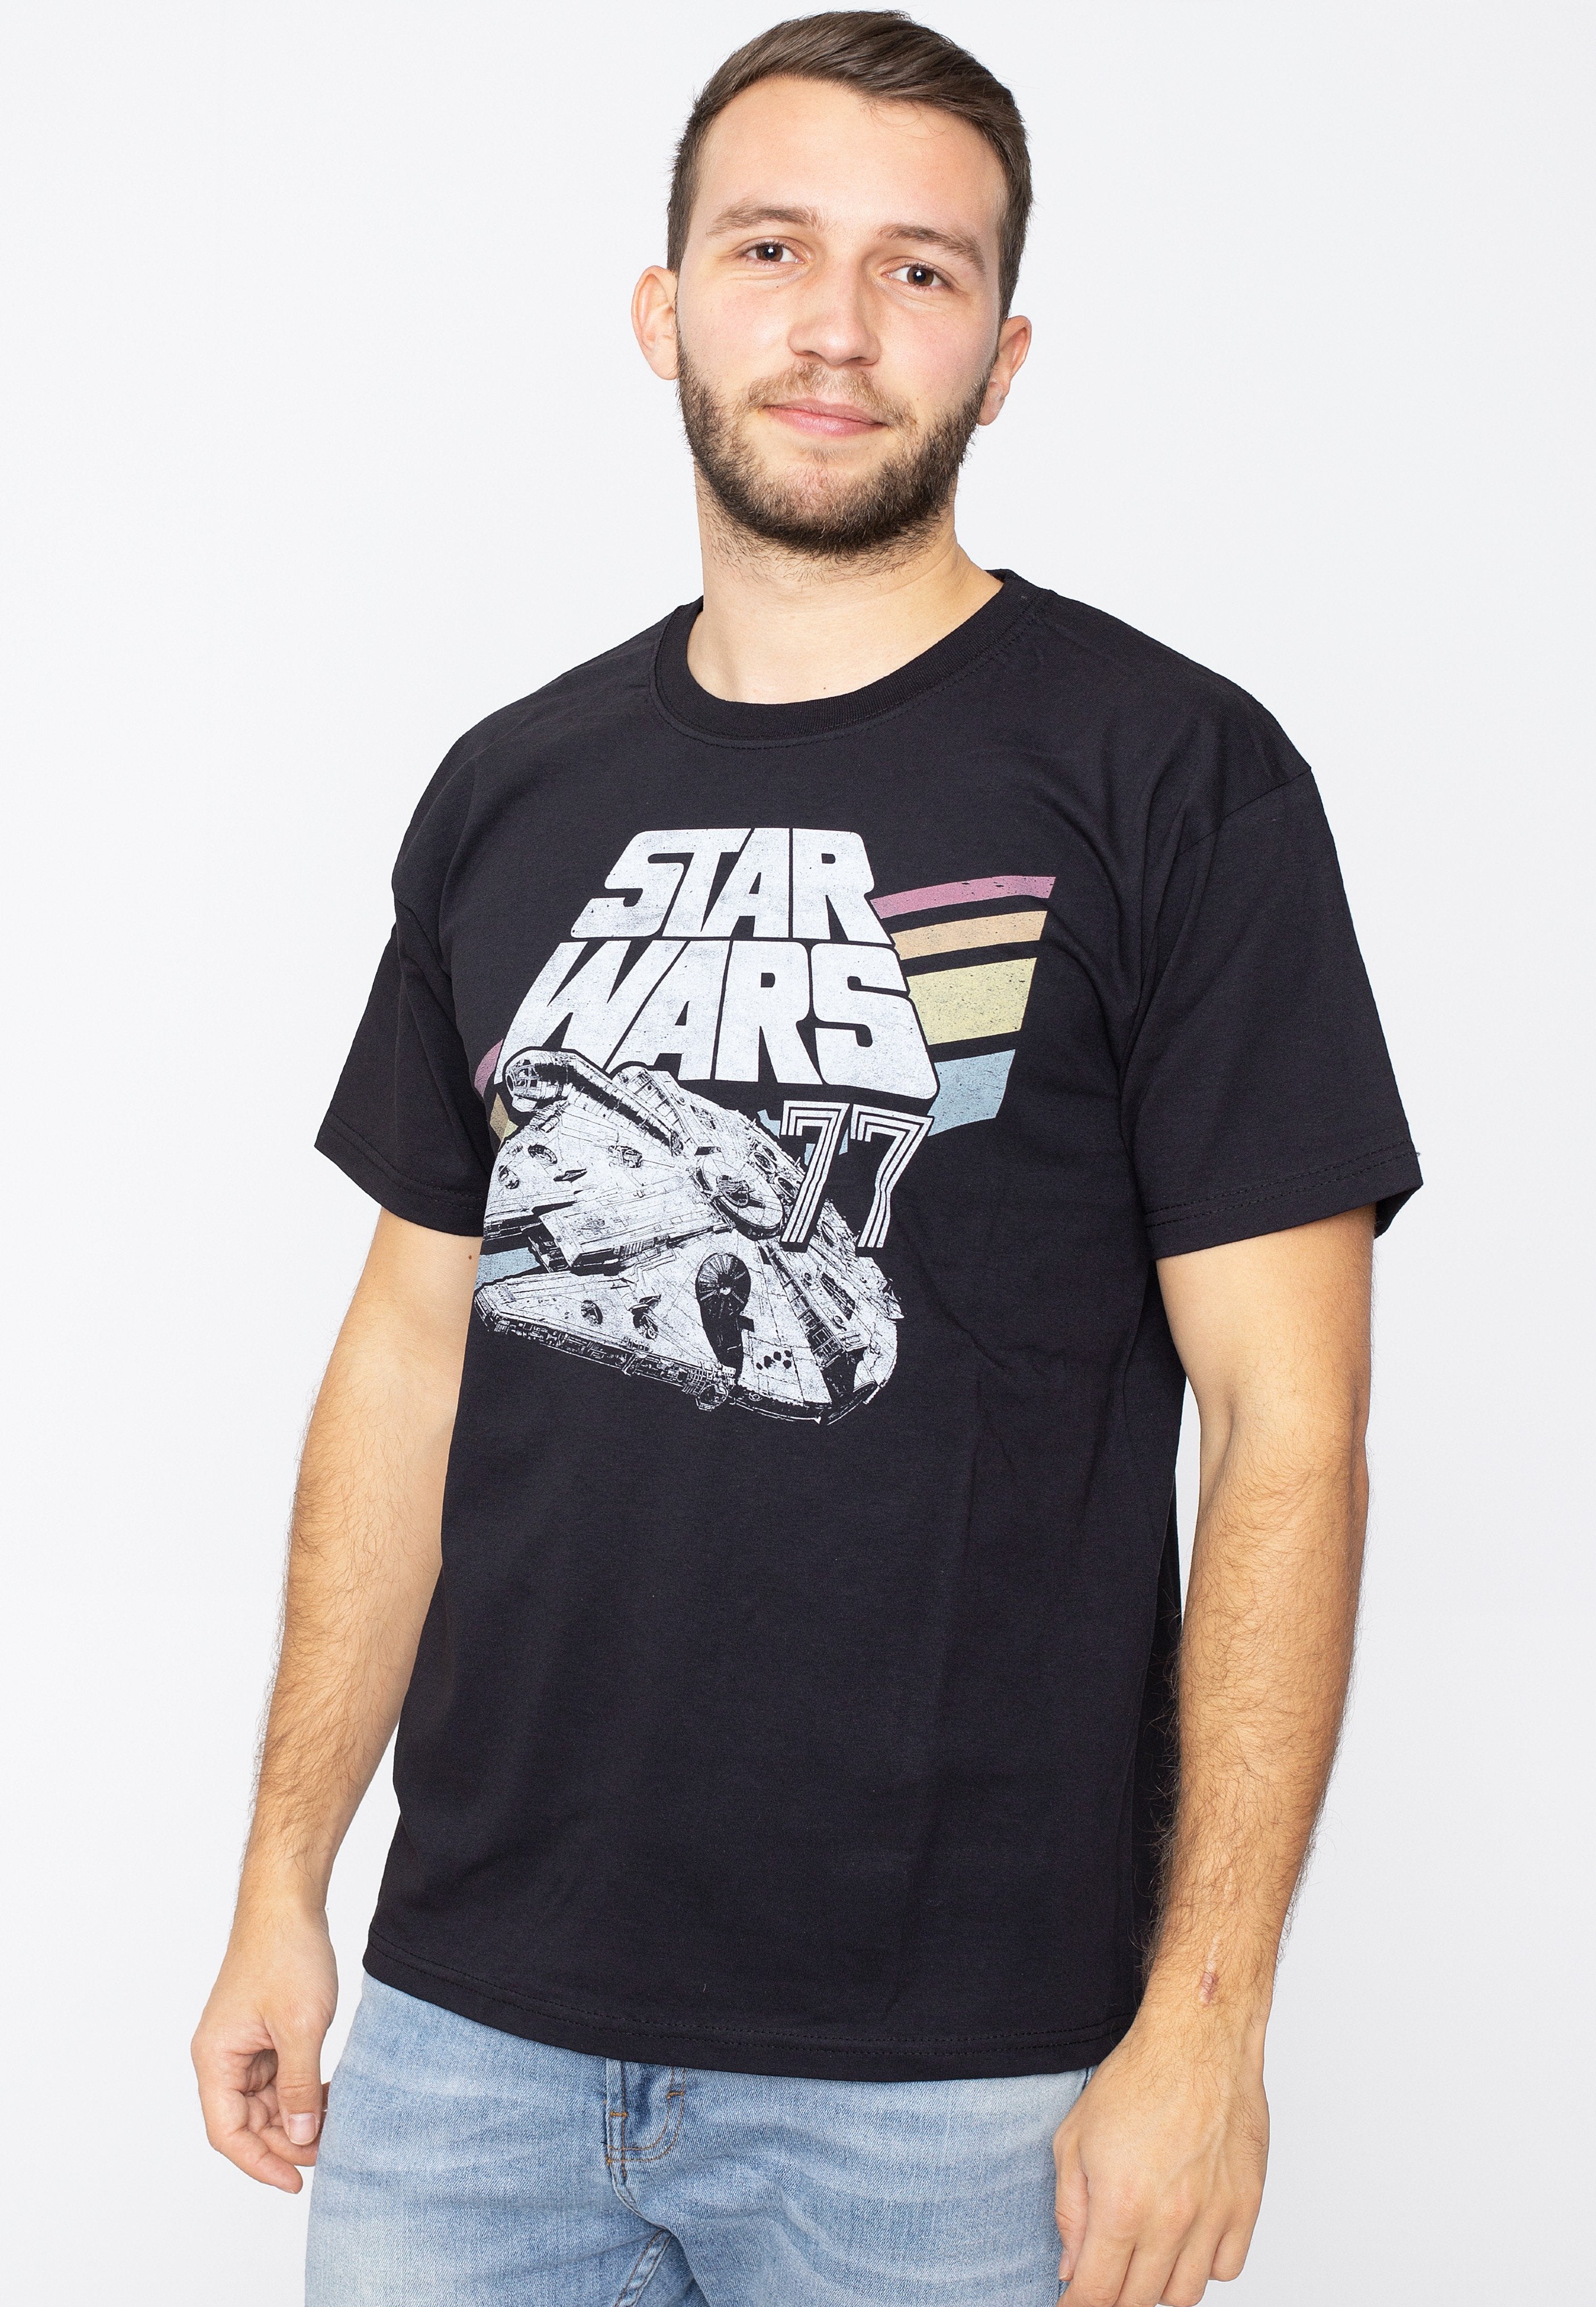 Star Wars - Awesome 77 - T-Shirt